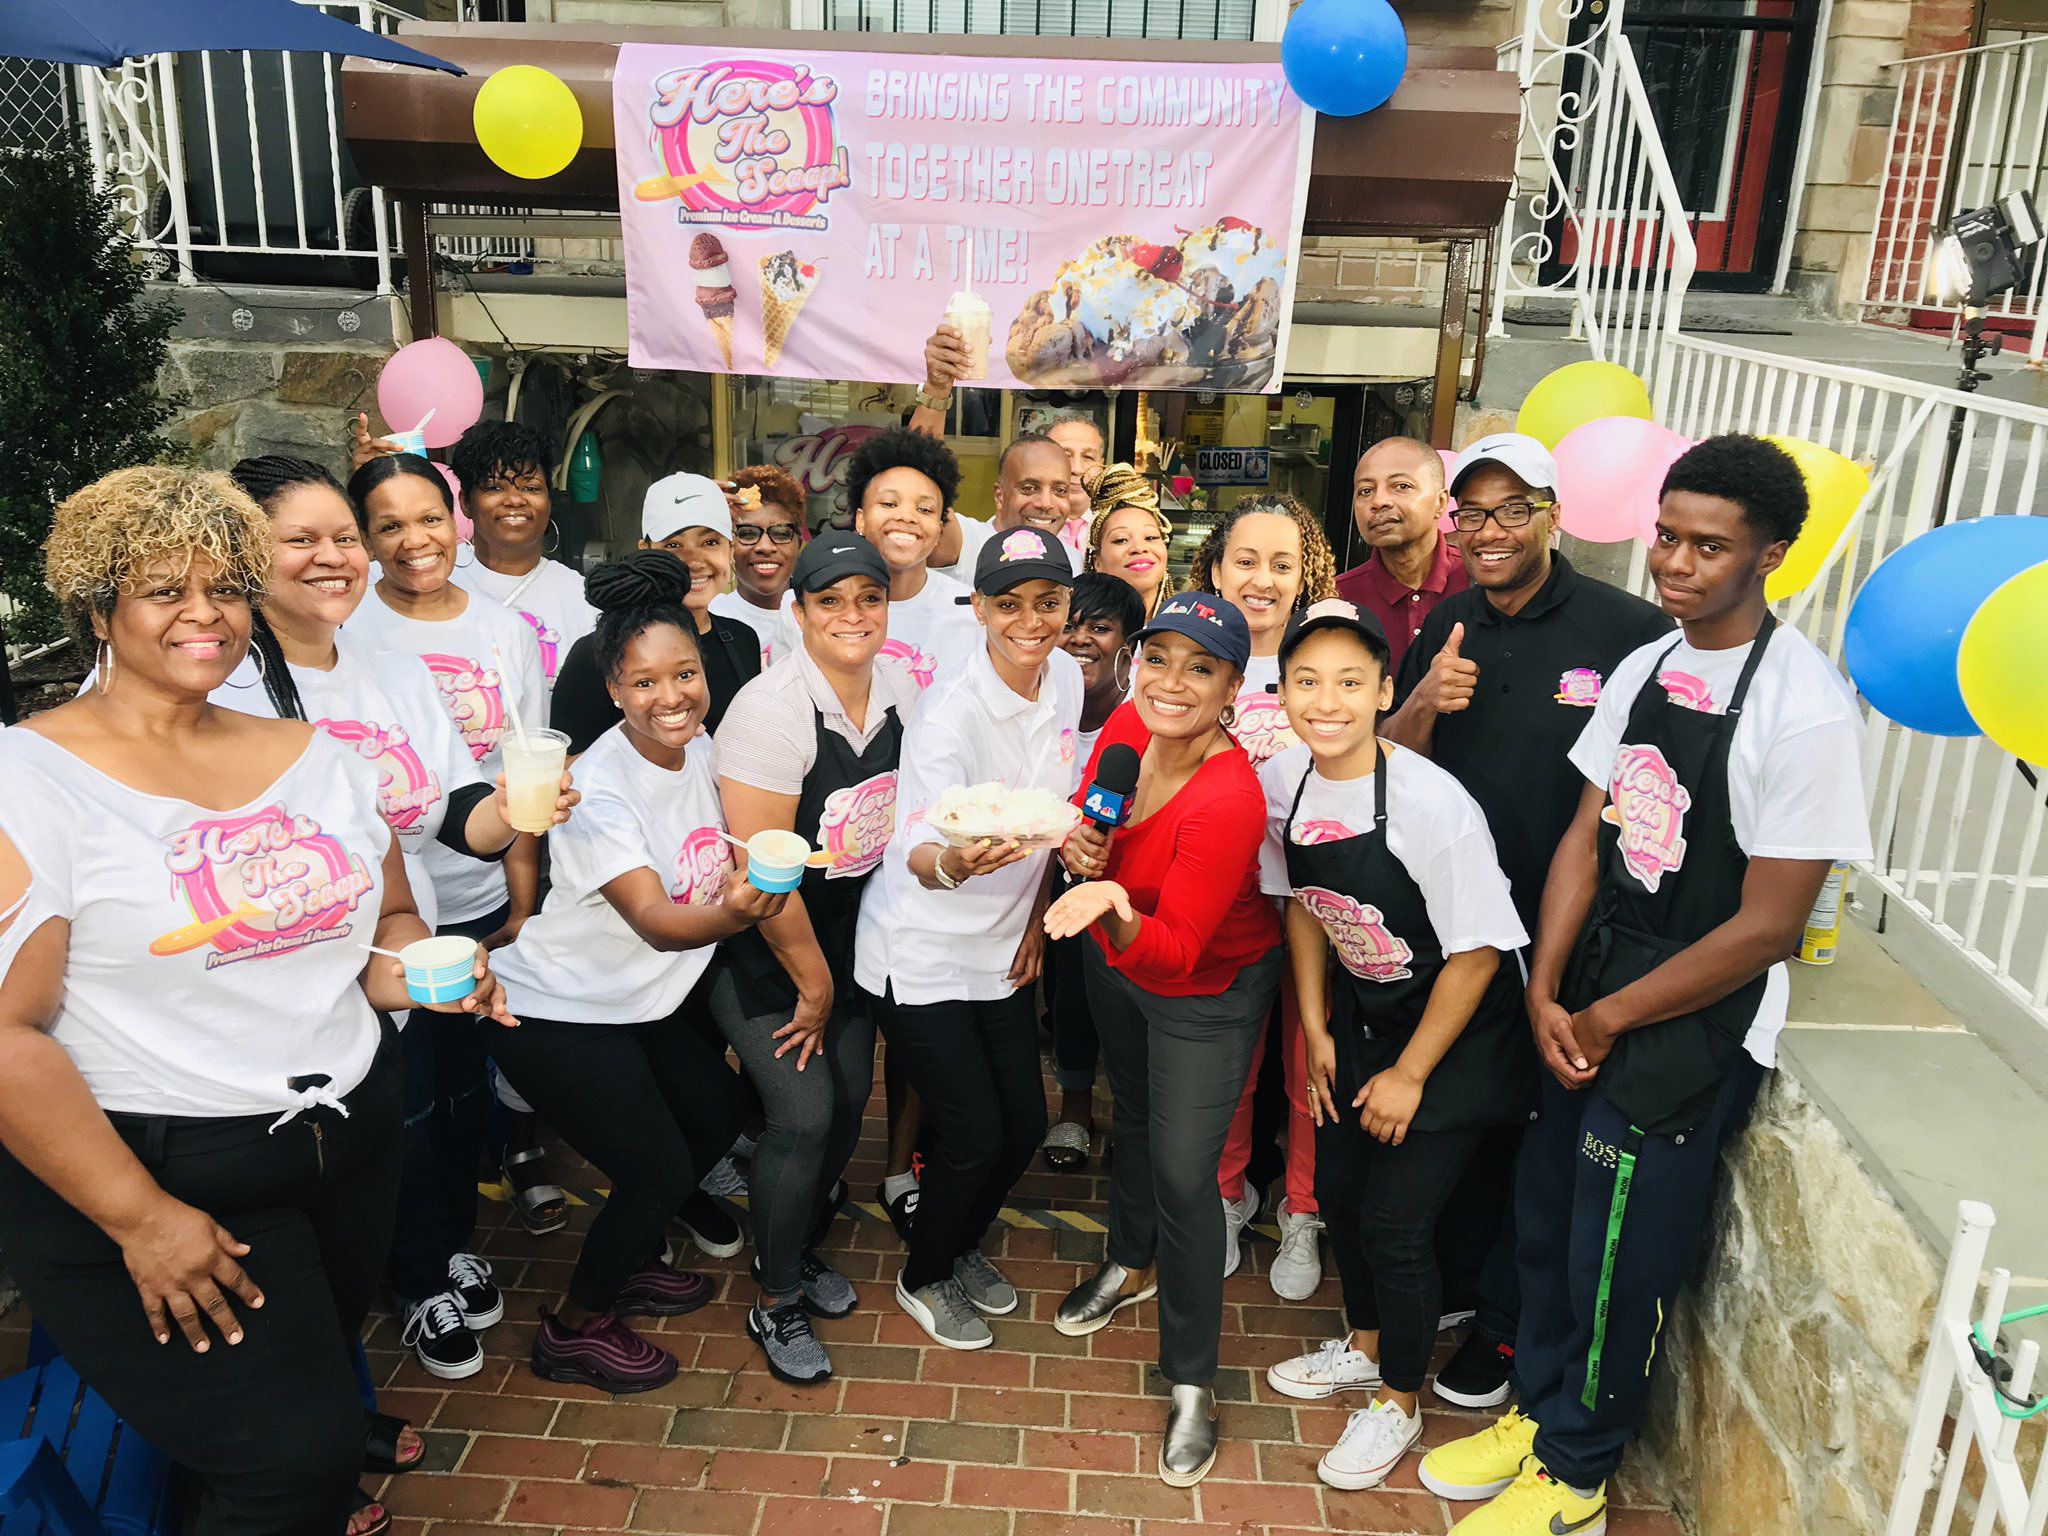 Washington, DC's Newest Ice Cream Shop Is All About Community says Karin Sellers!